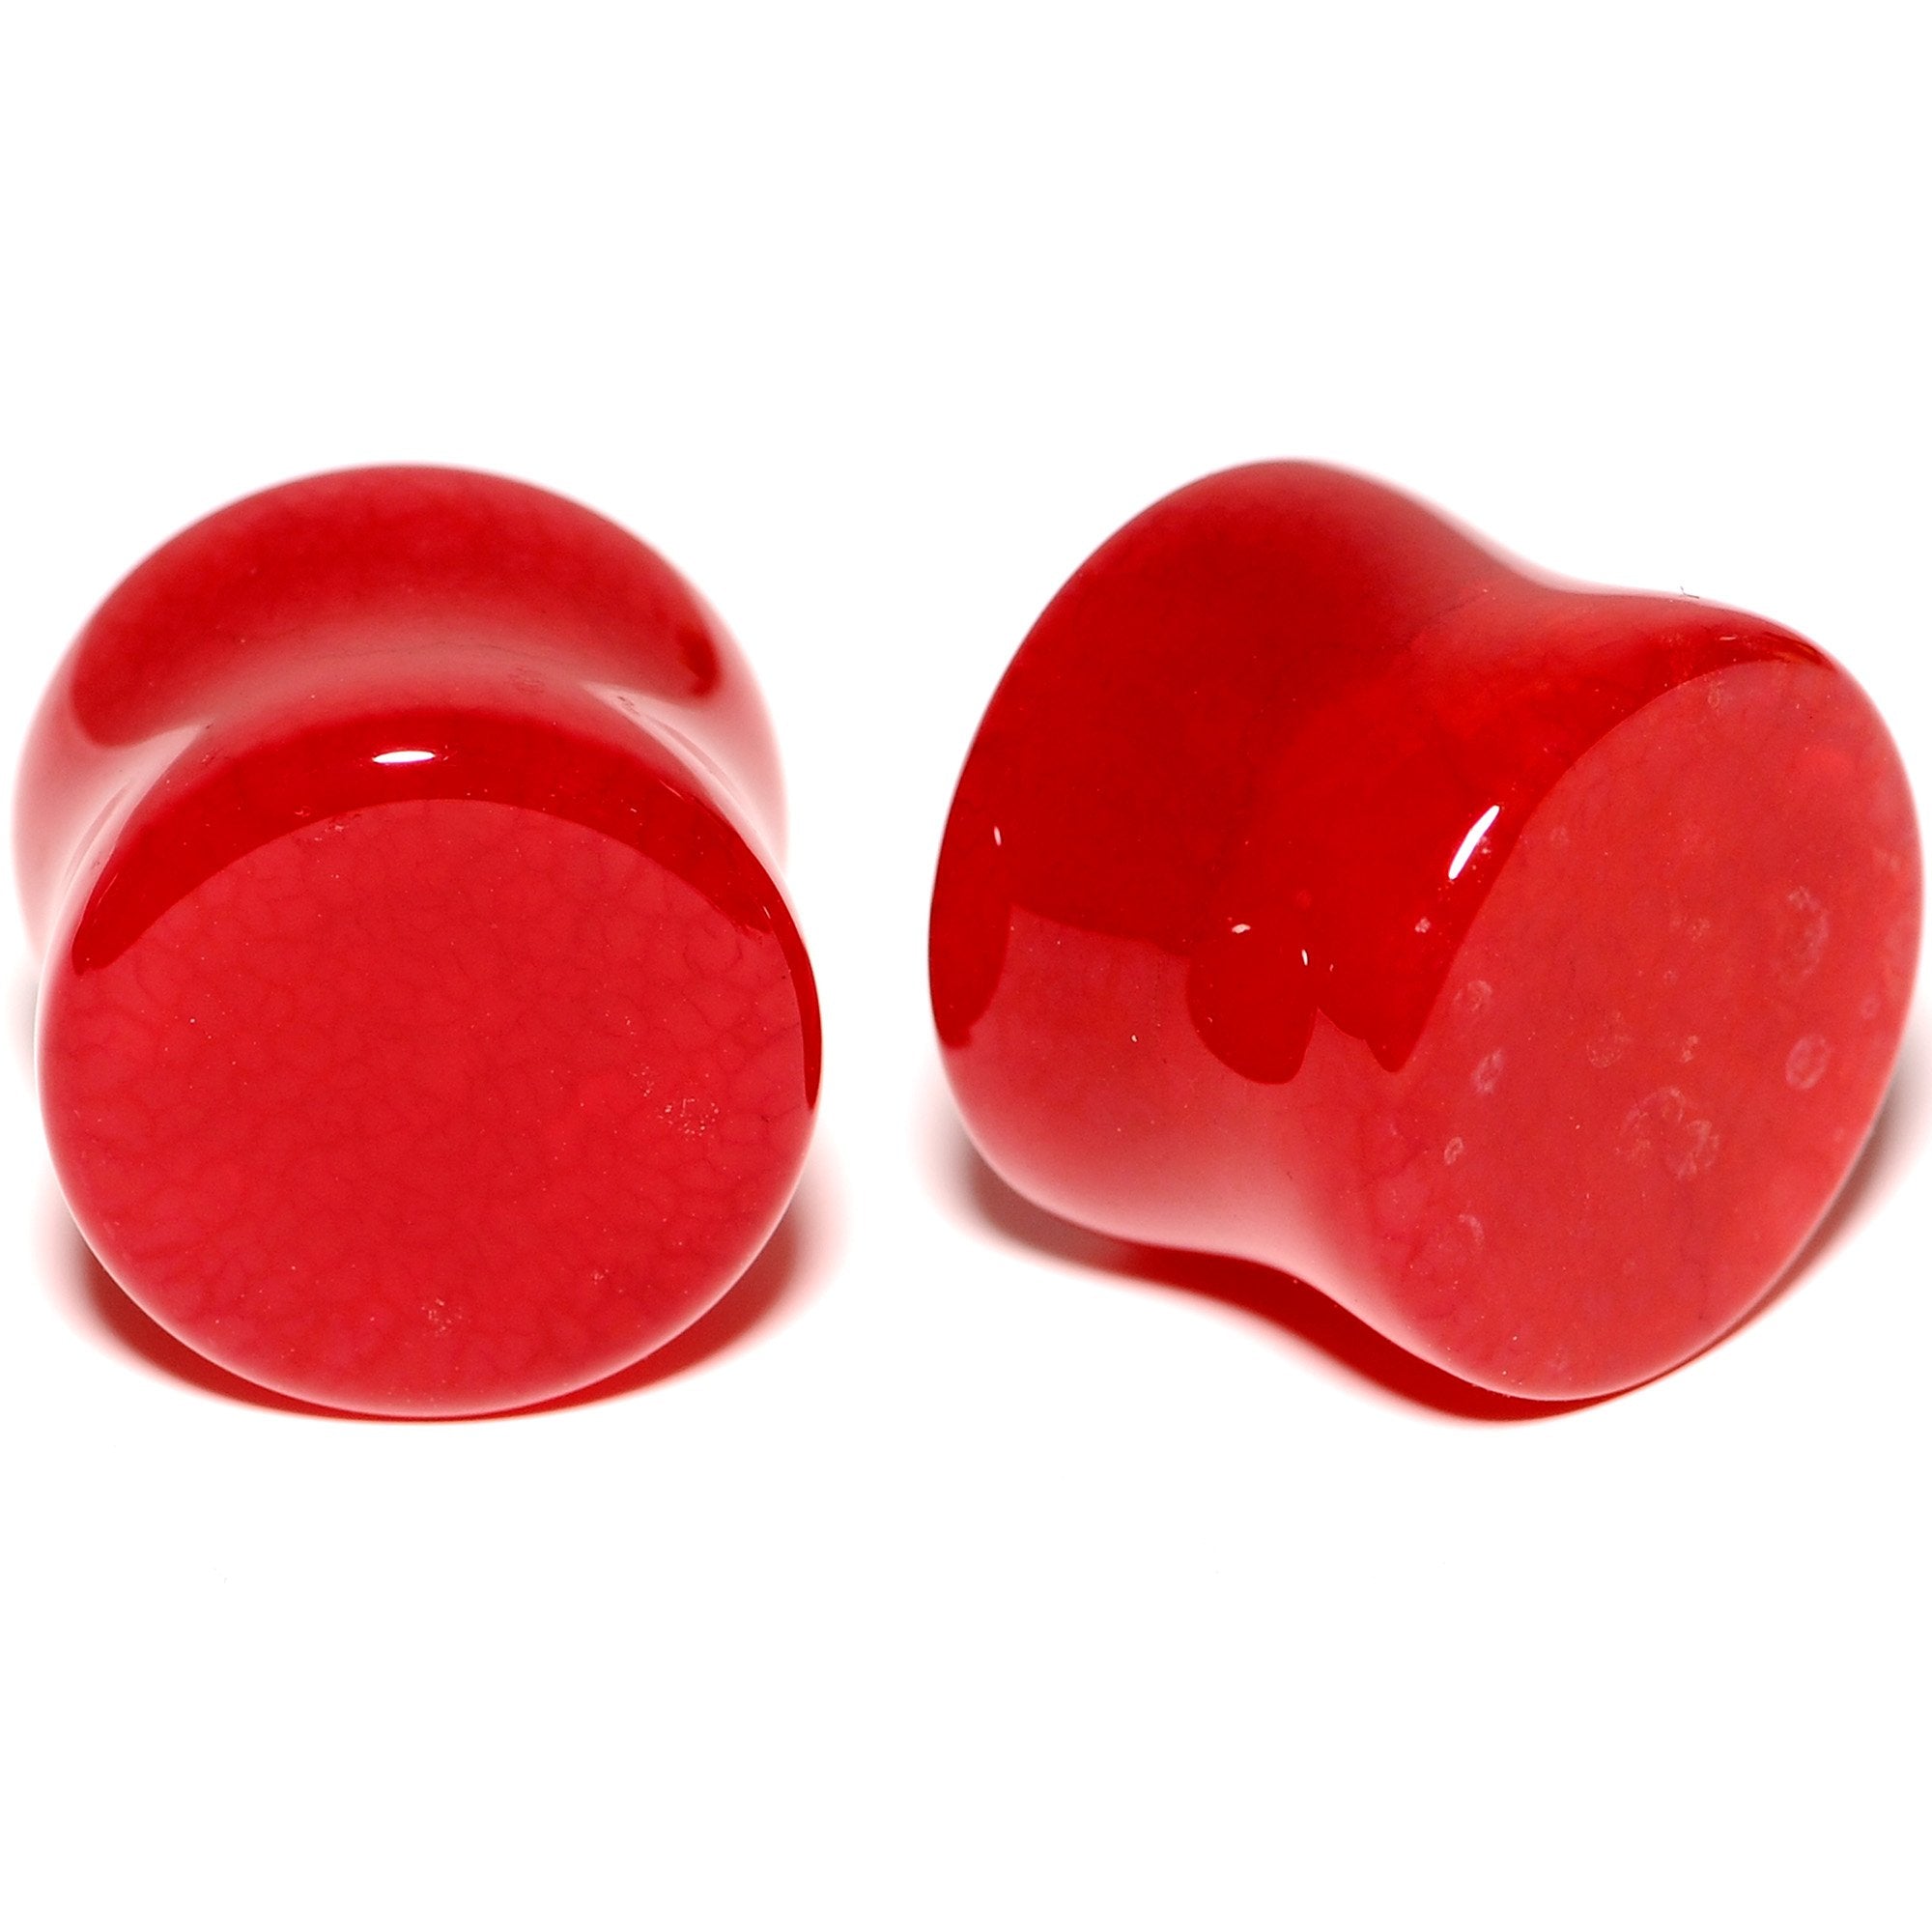 Solid Red Stone Saddle Plug Set 6mm to 25mm